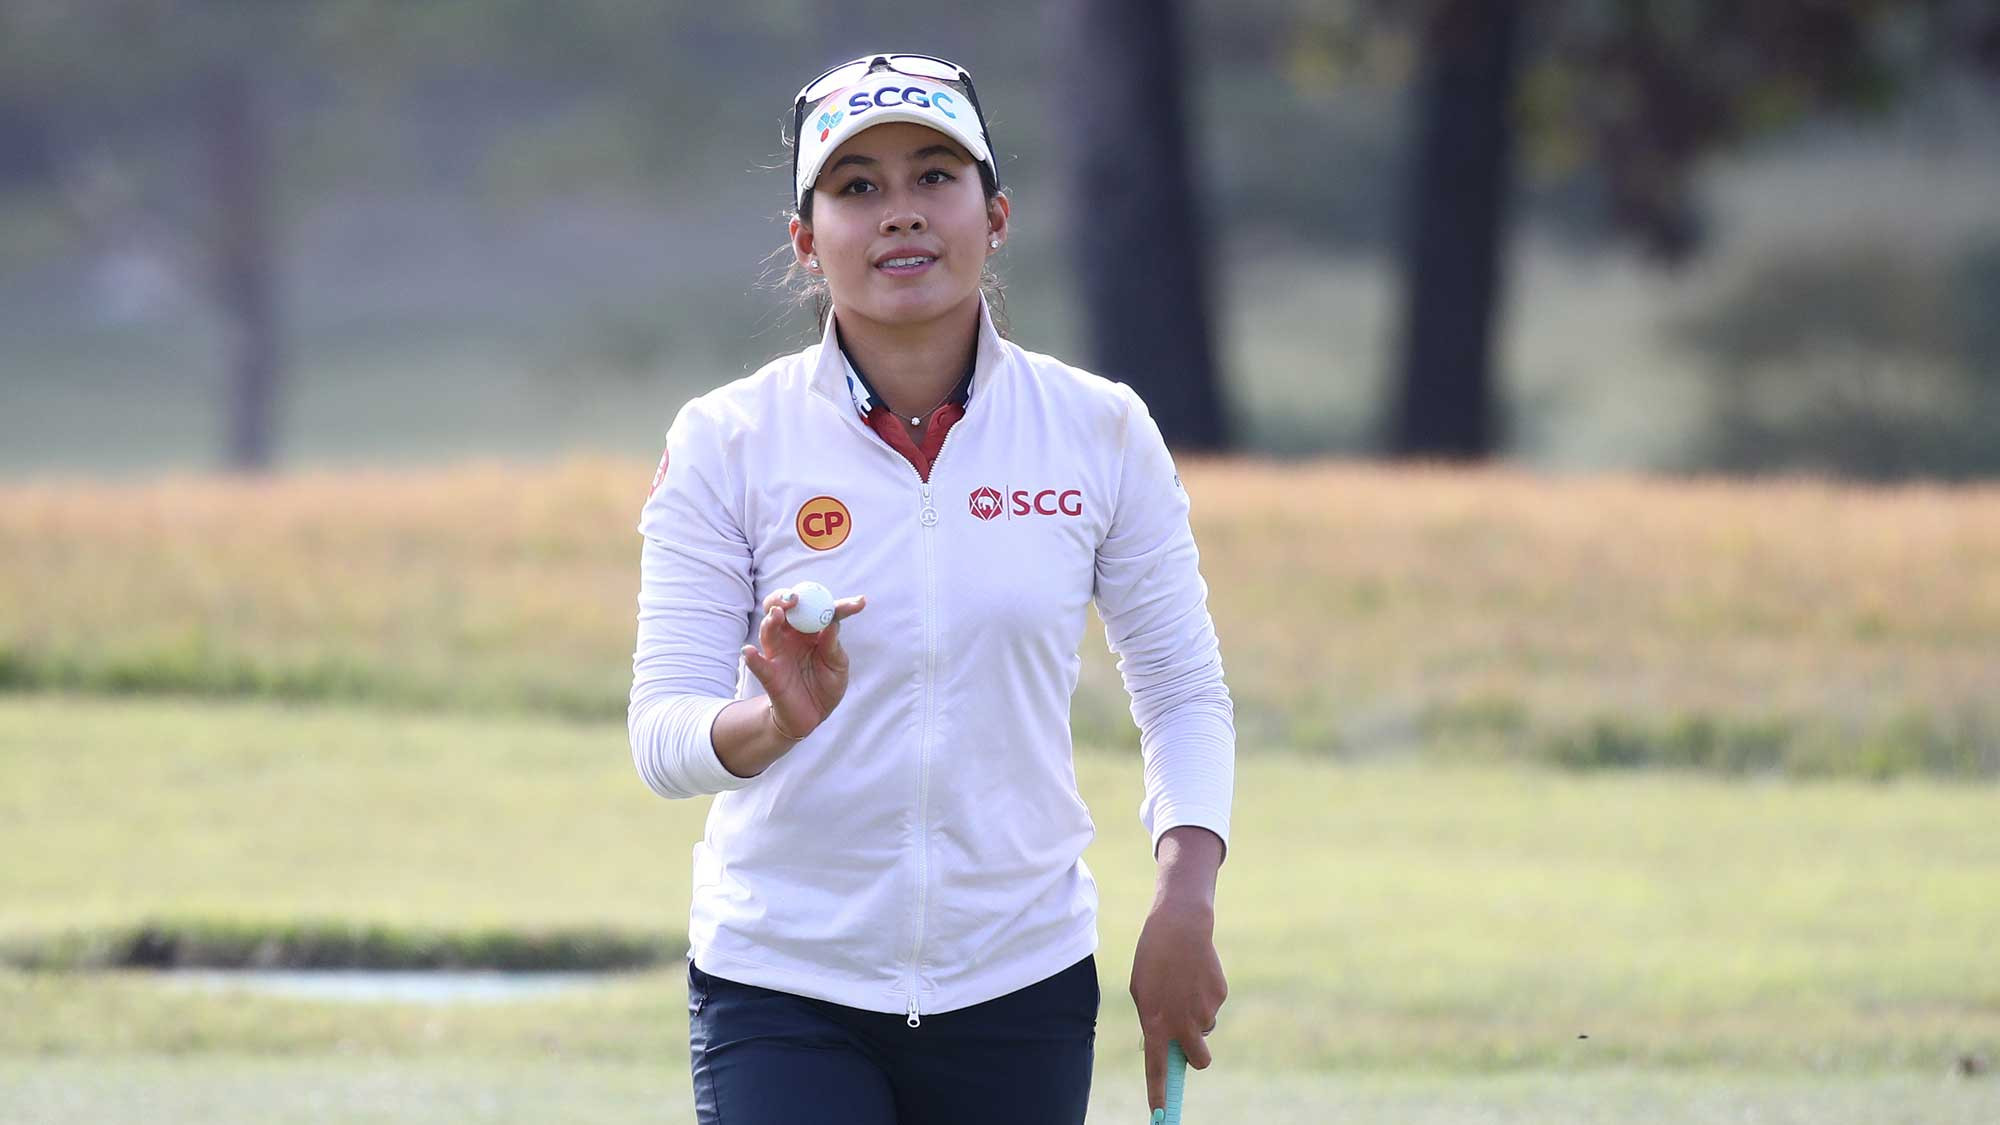 Thitikul, 19, becomes women's golf number one